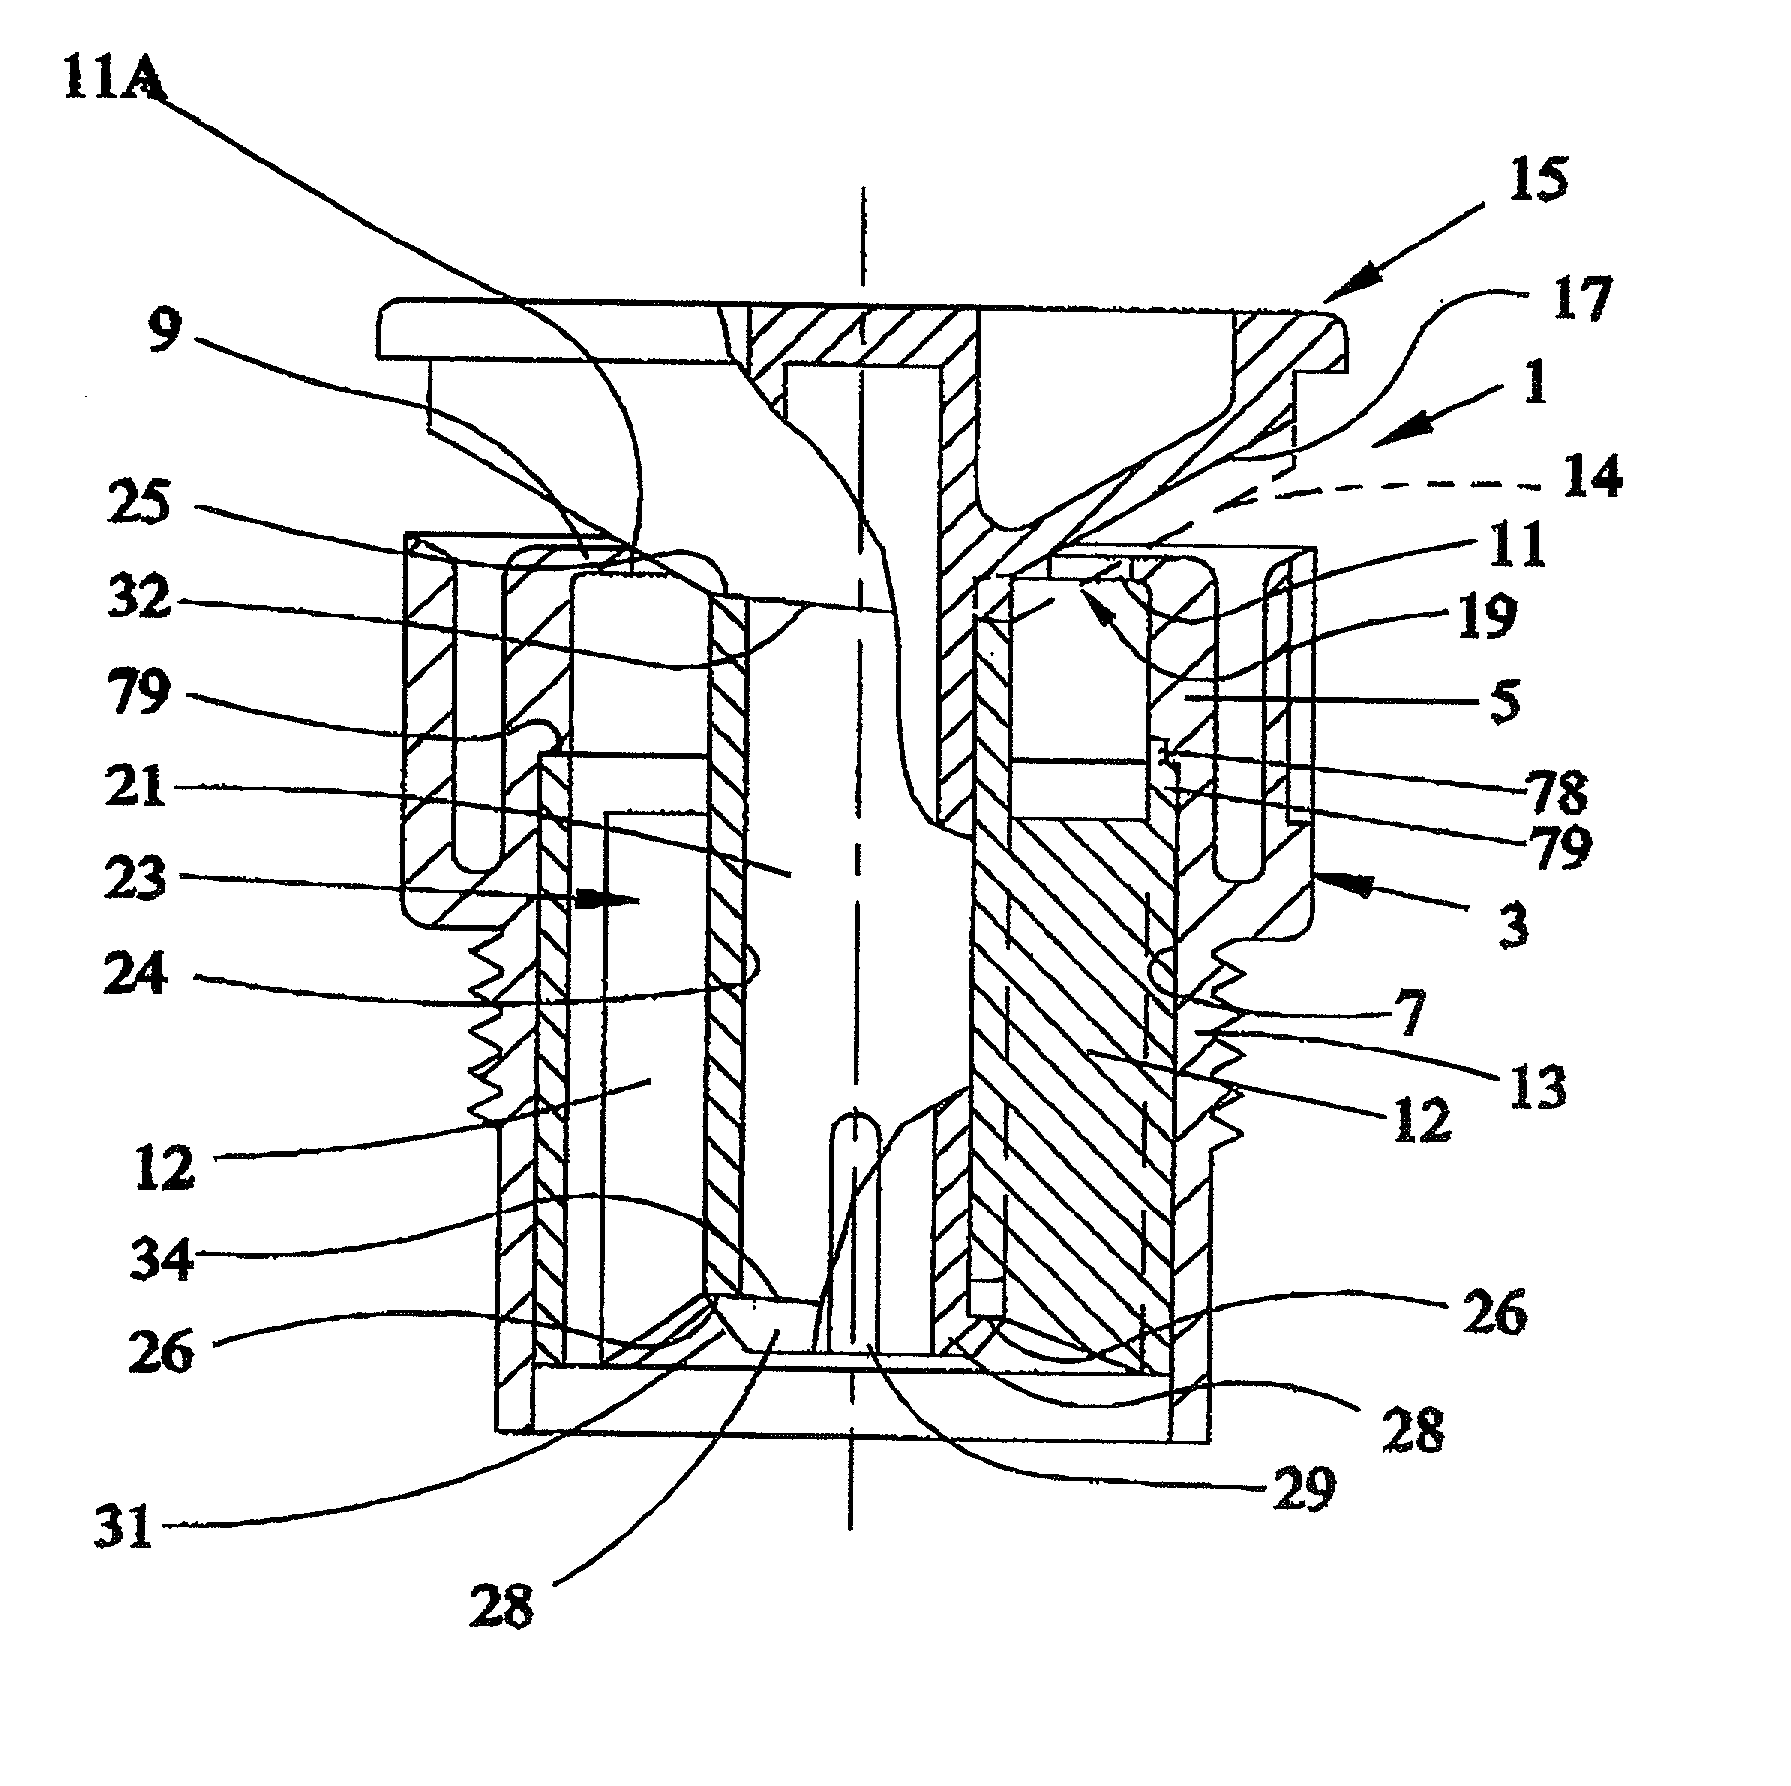 Spray nozzle with adjustable arc spray elevation angle and flow